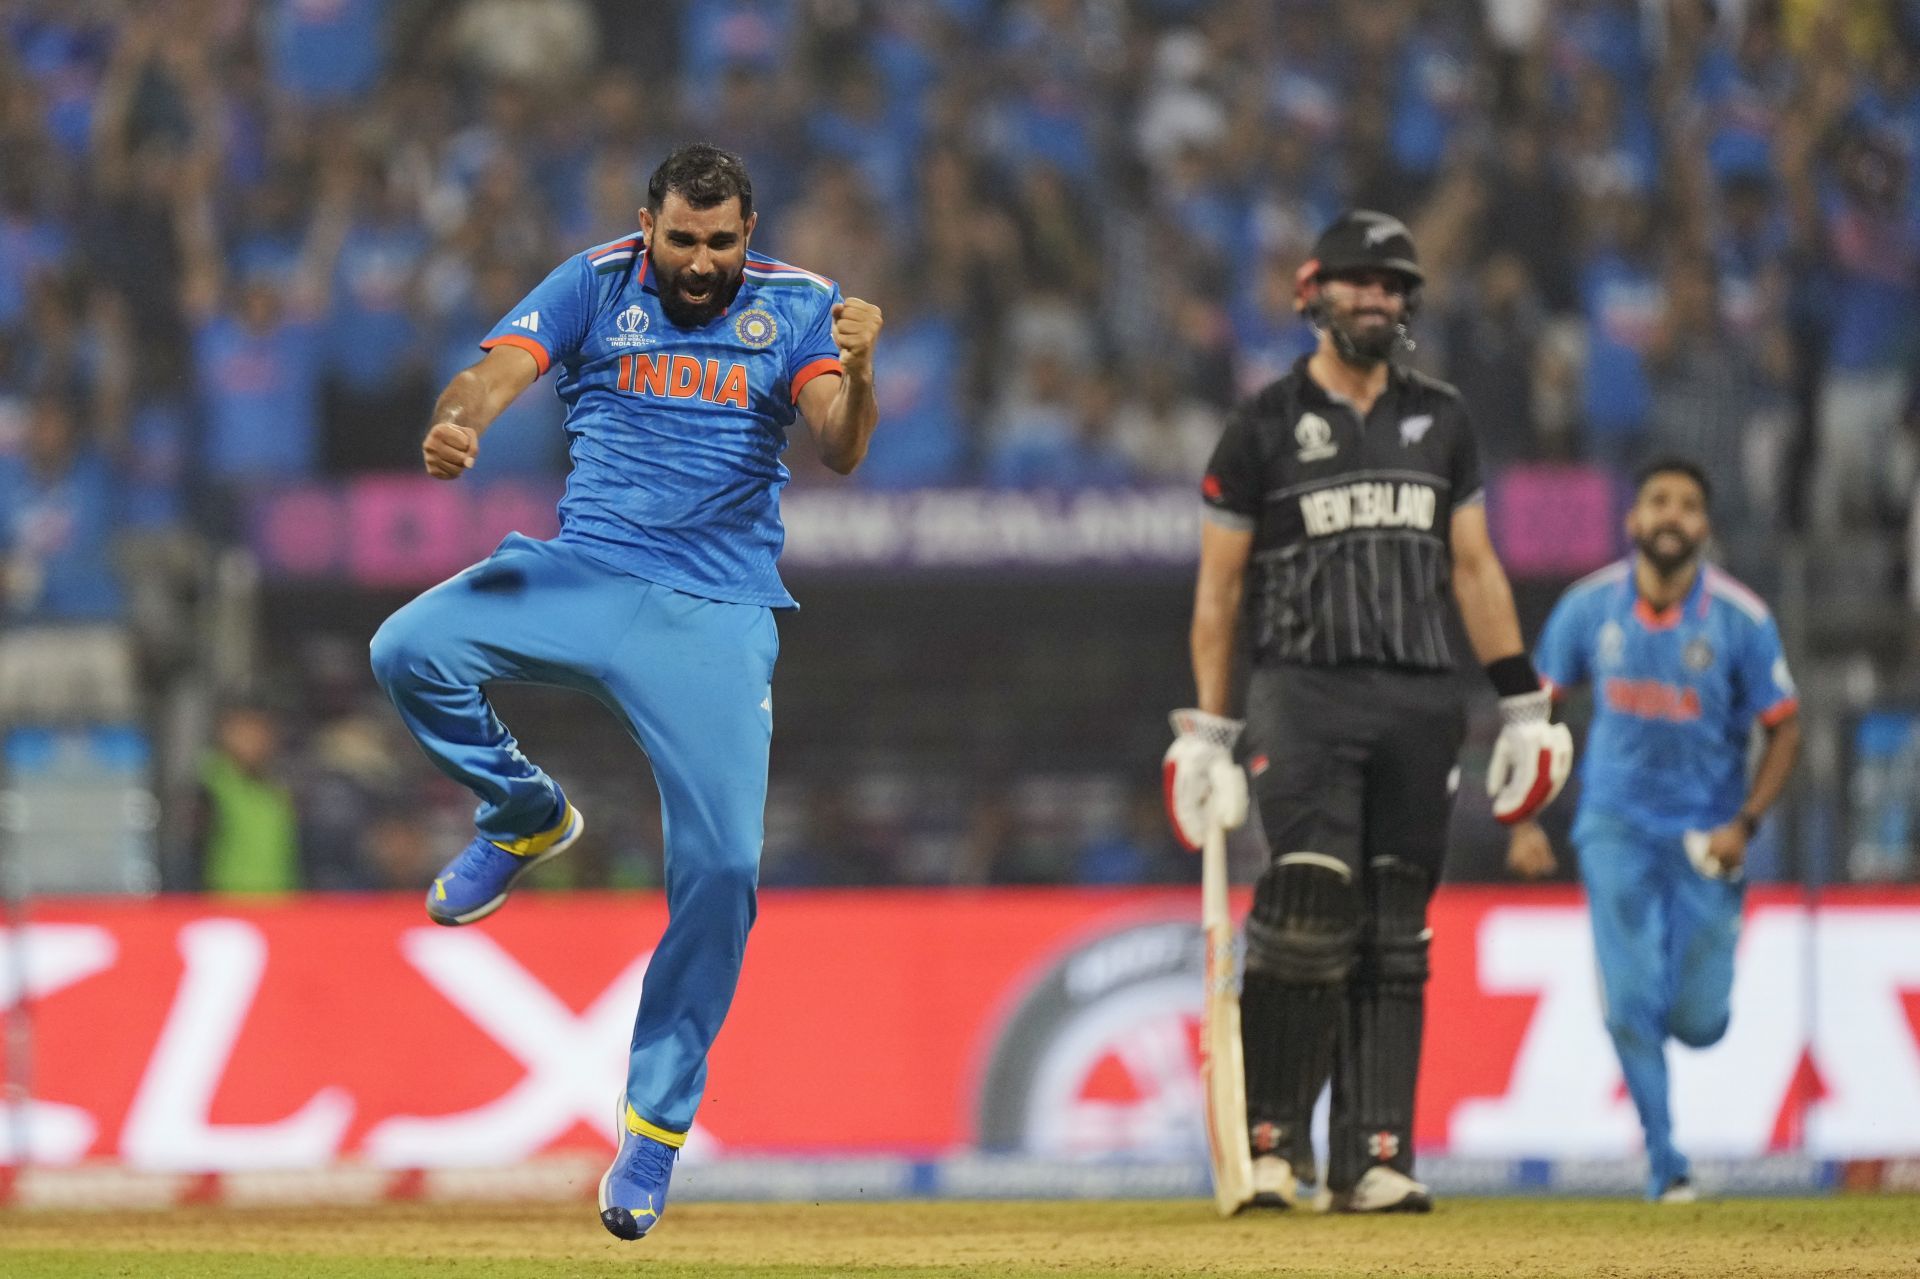 Mohammed Shami celebrates a wicket (Credits: Getty)